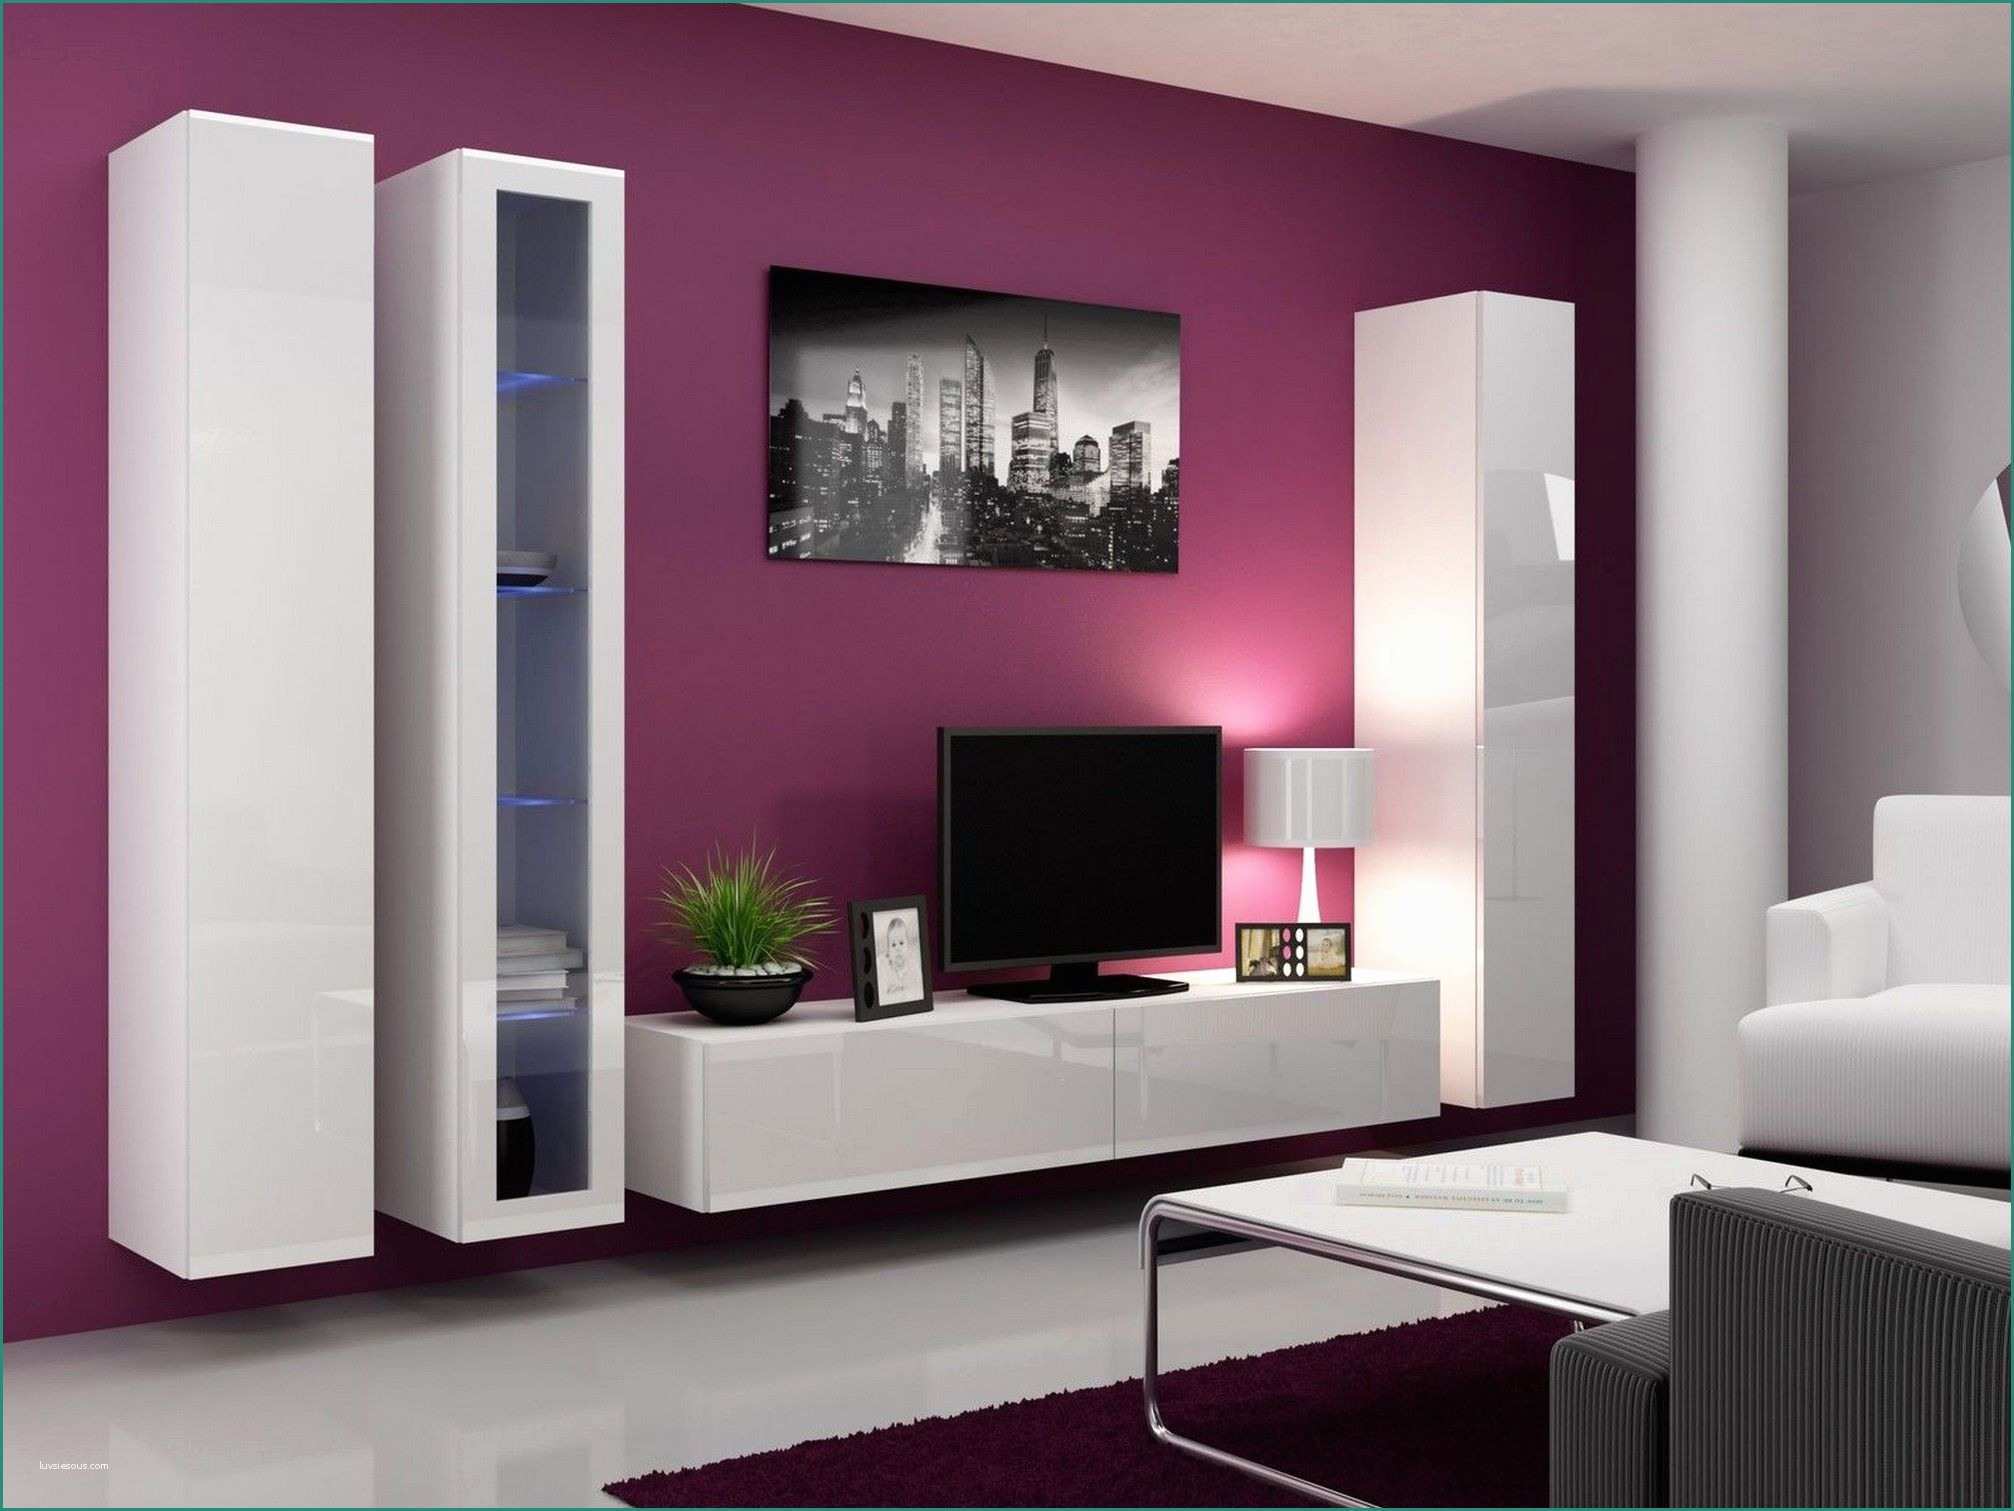 Porta Tv Industrial E Wall Mounted Tv Unit Furniture Pink Color Schemes Ideas for